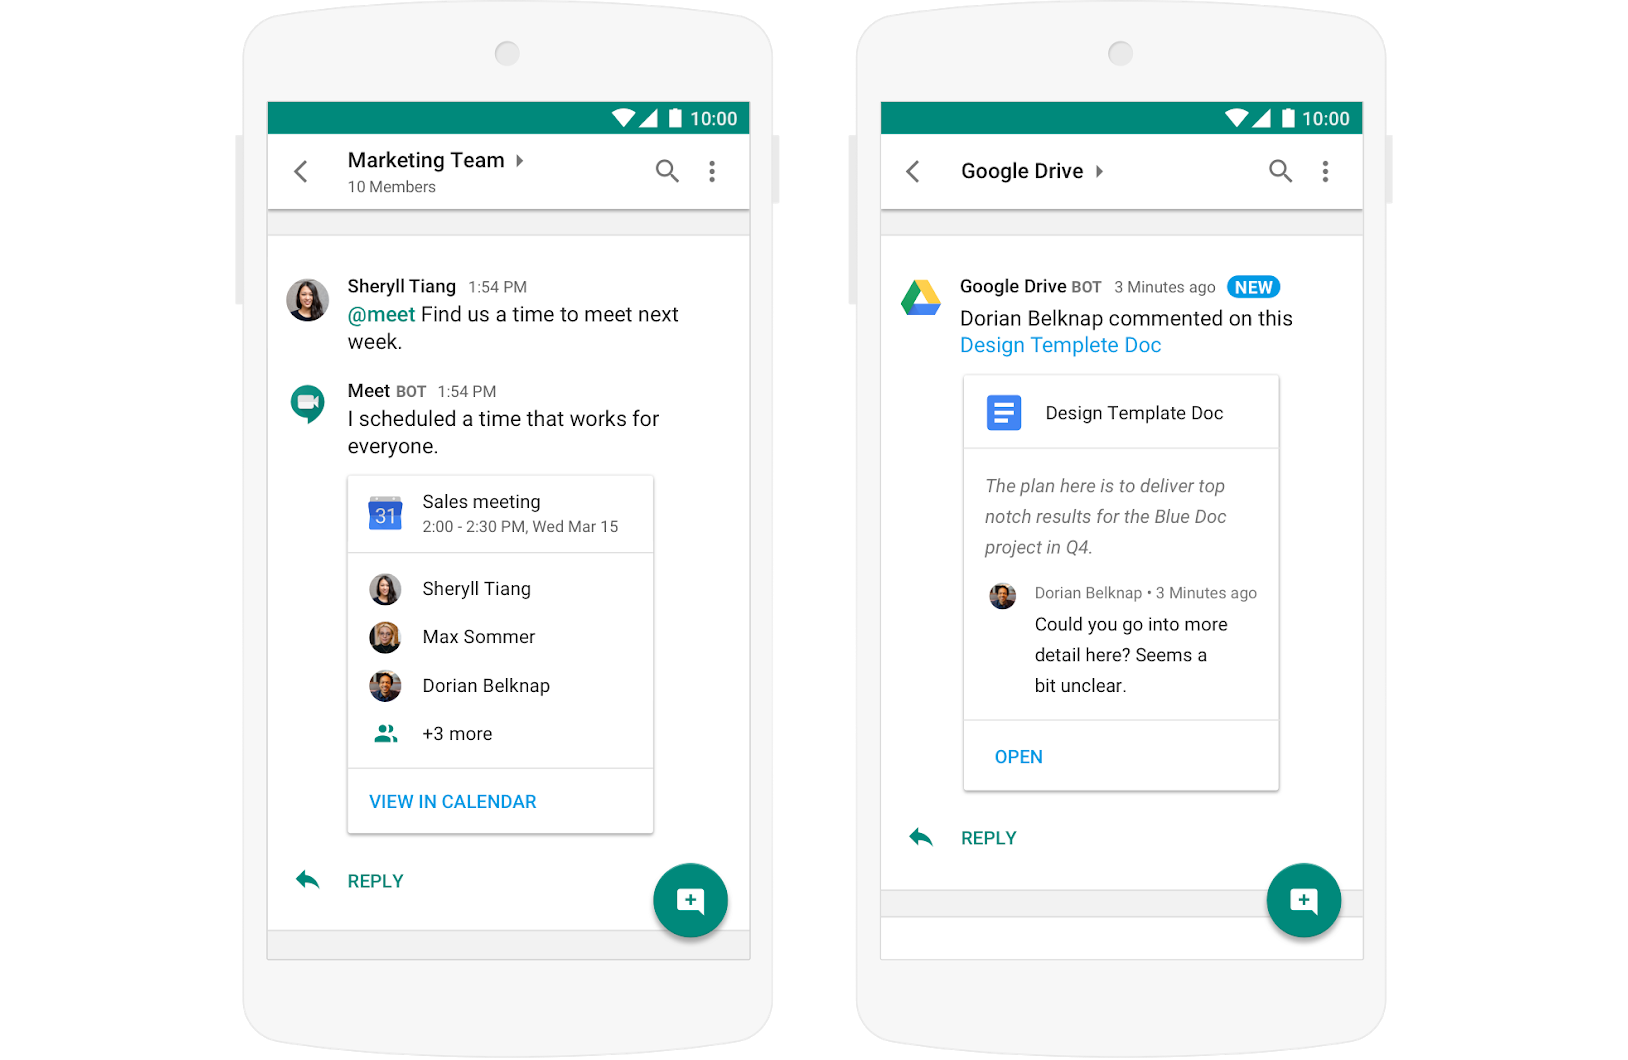 Upgrading from Google Hangouts to Google Chat